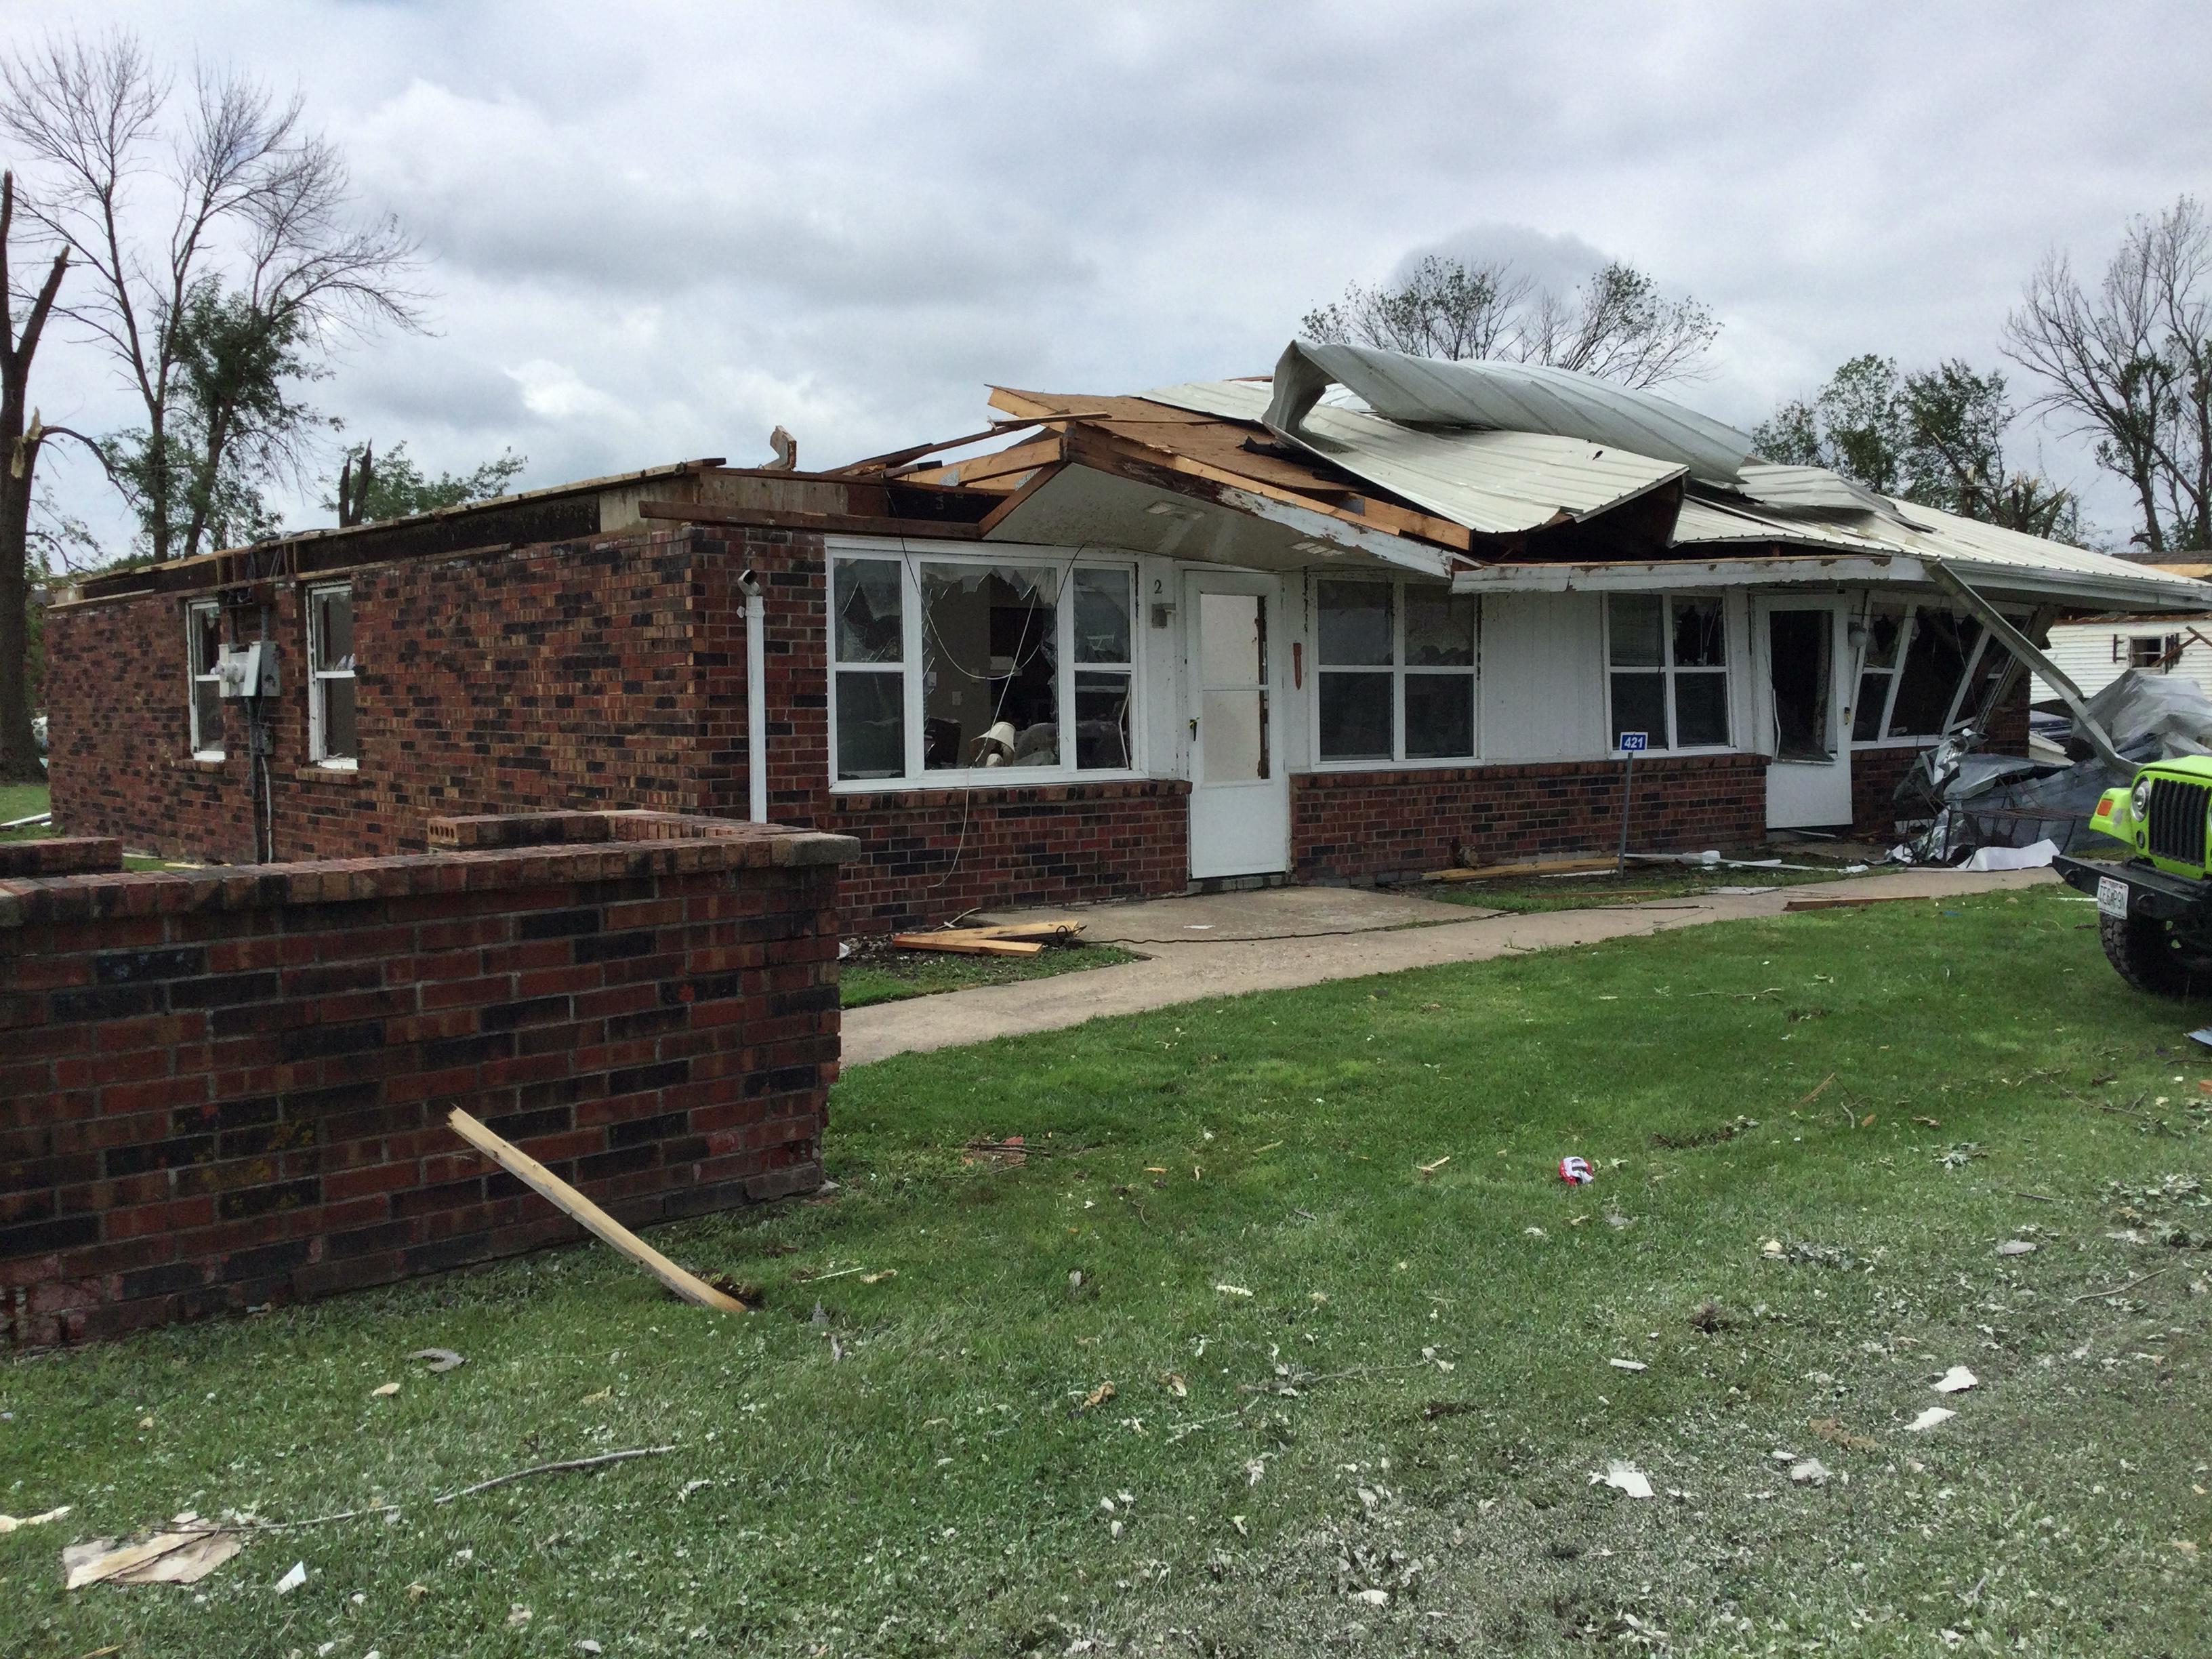 Major roof damage to a home in Baring Missouri